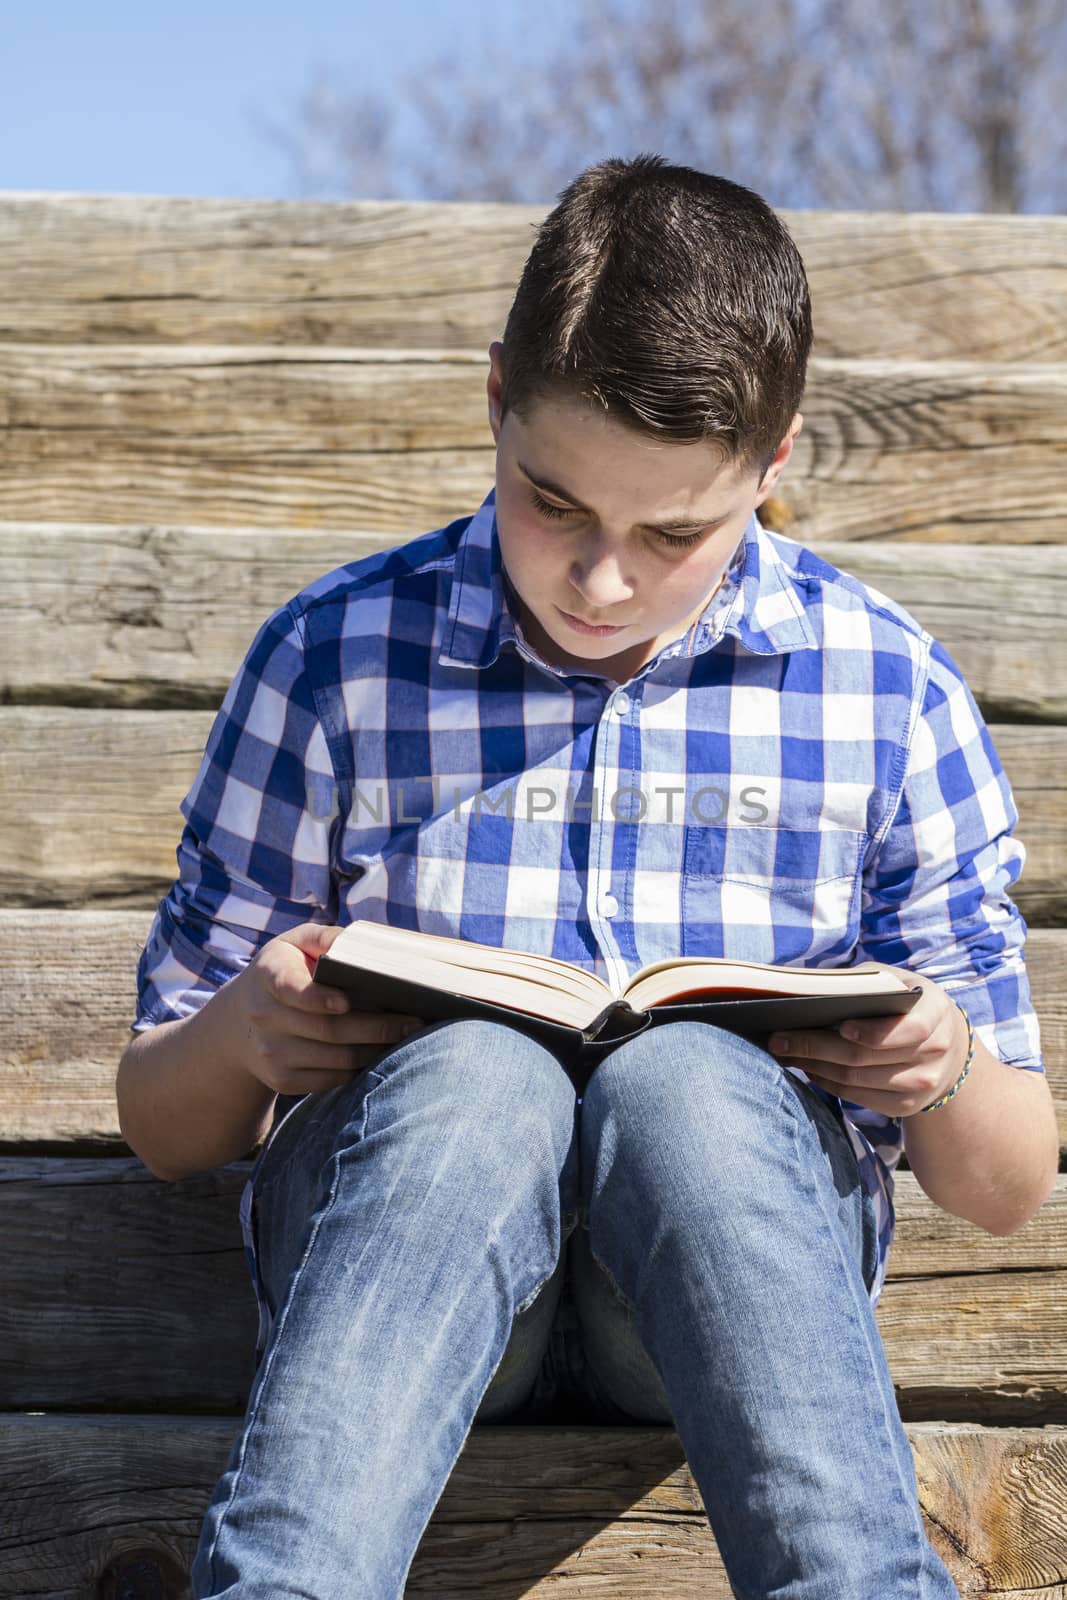 Learn.Young boy reading a book in the woods with shallow depth of field and copy space